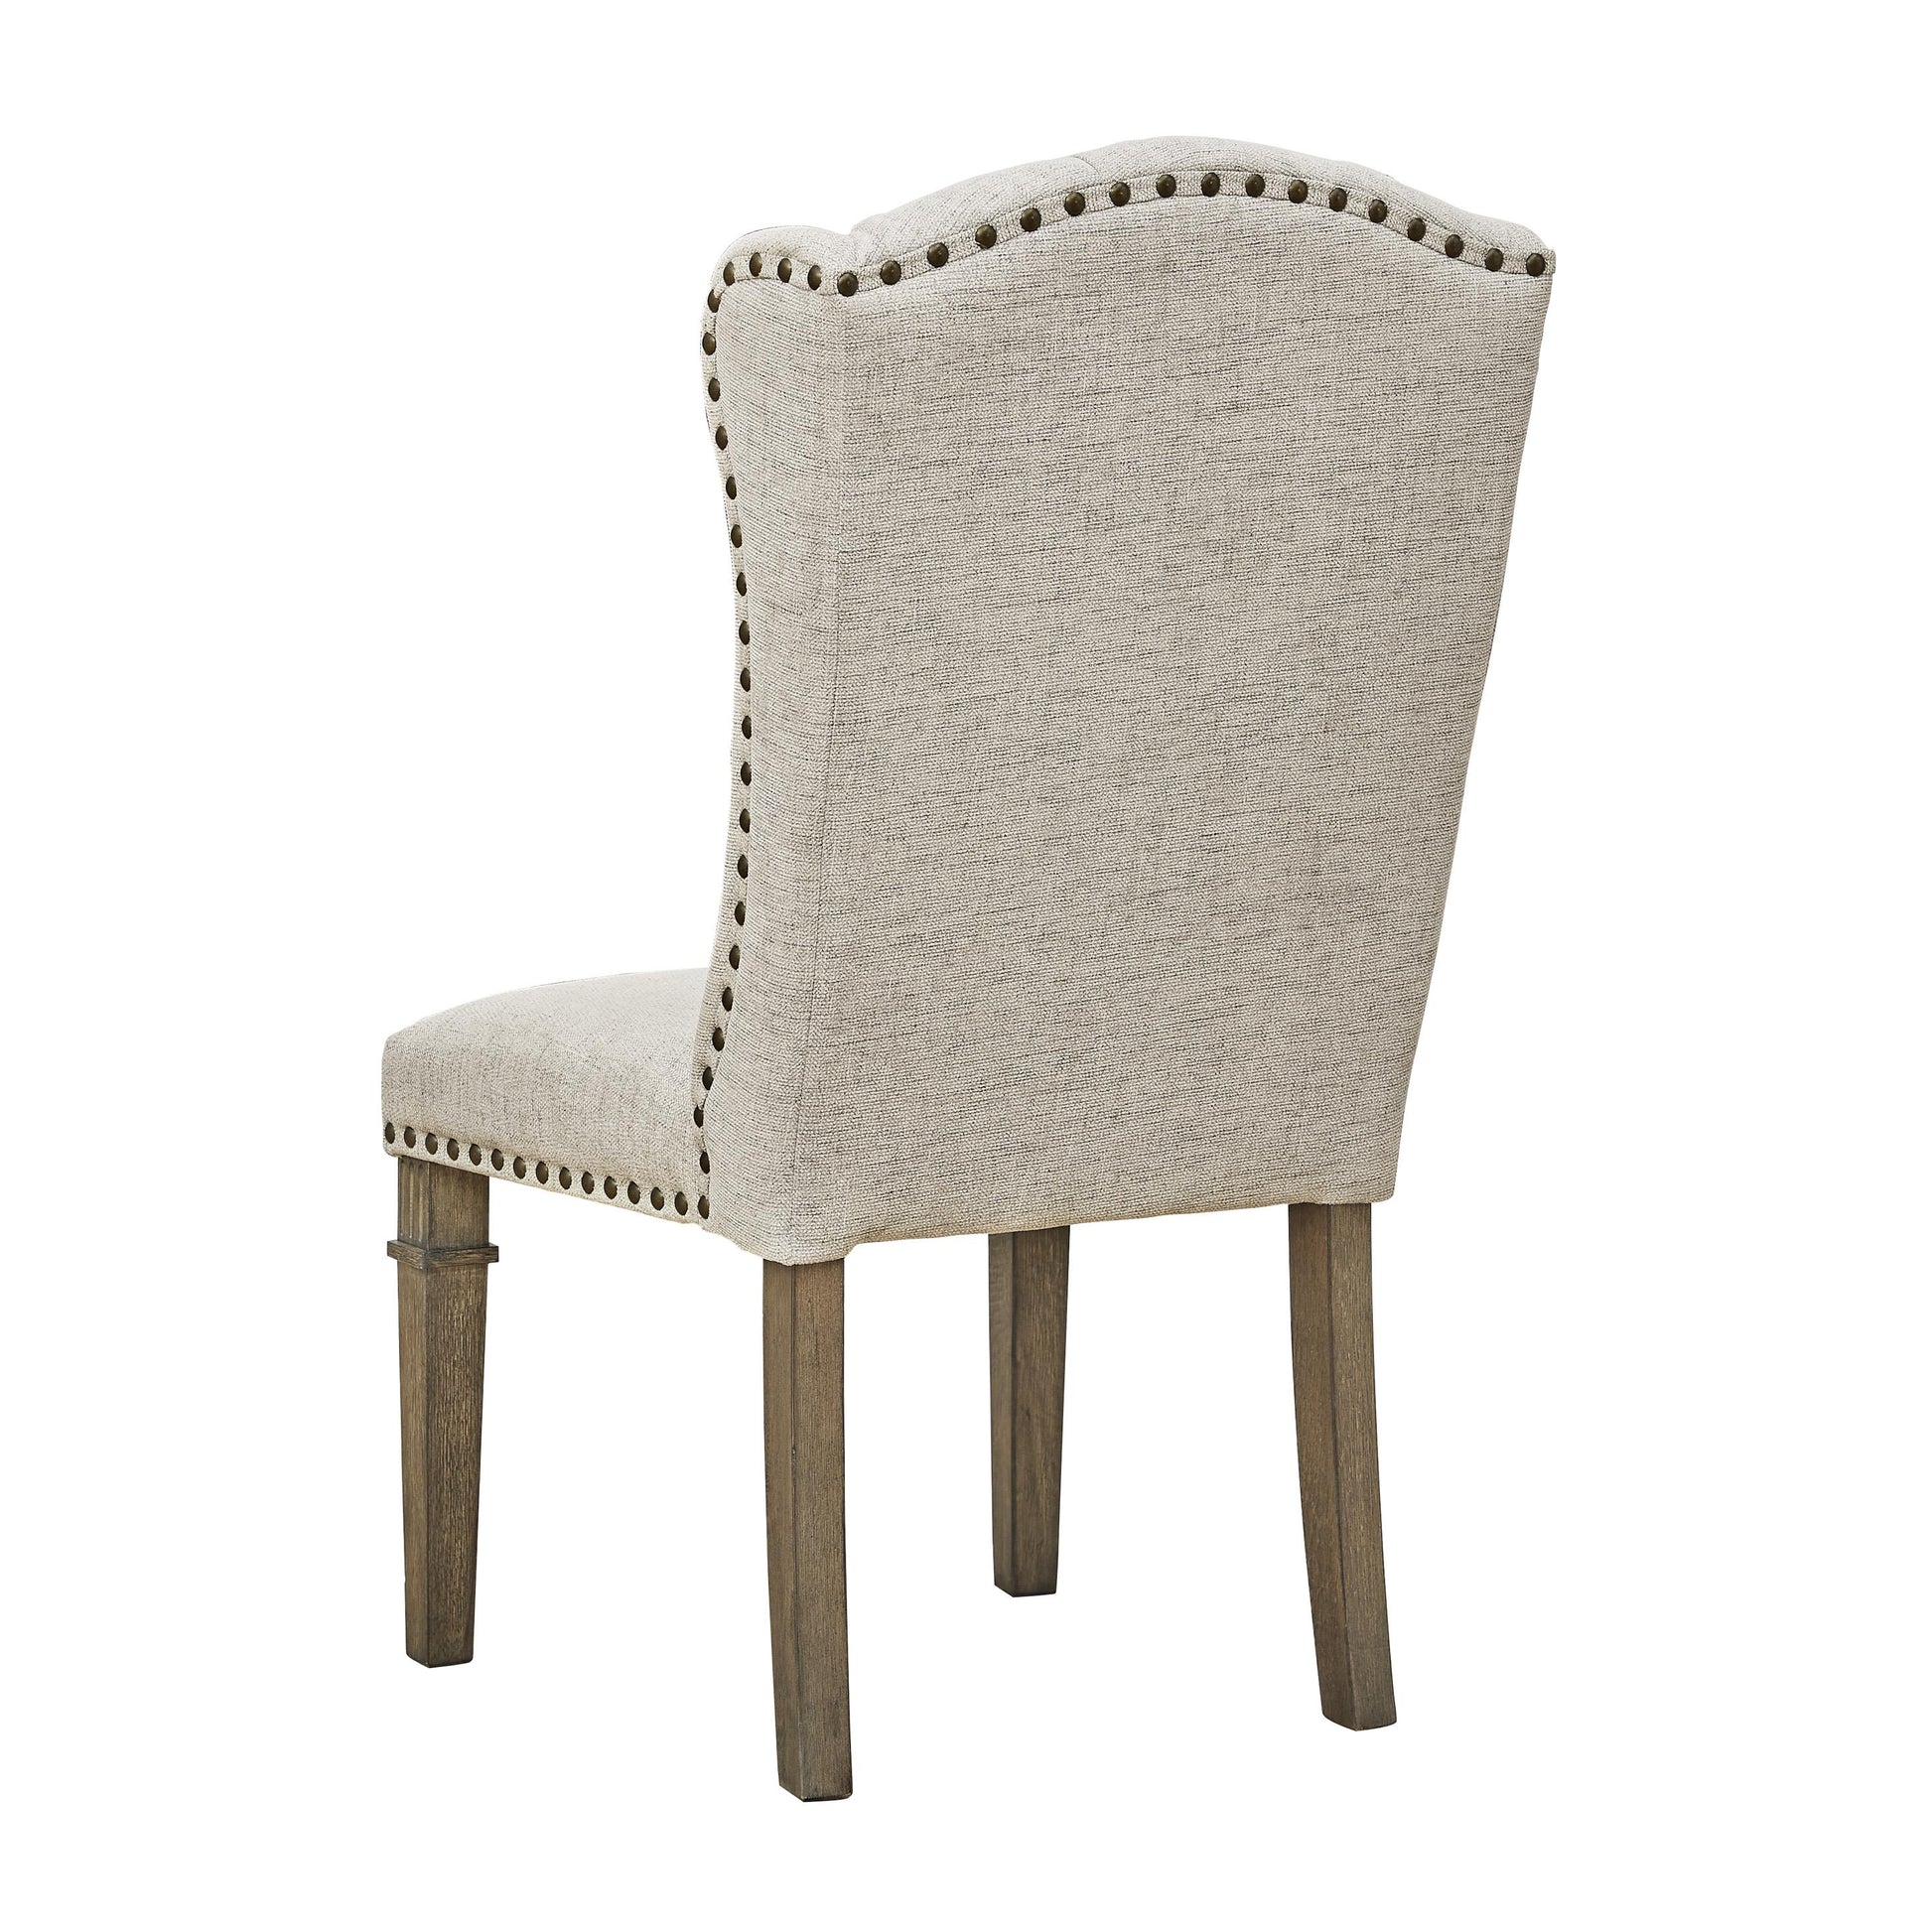 Signature Design by Ashley Markenburg Dining Chair D770-02 IMAGE 4